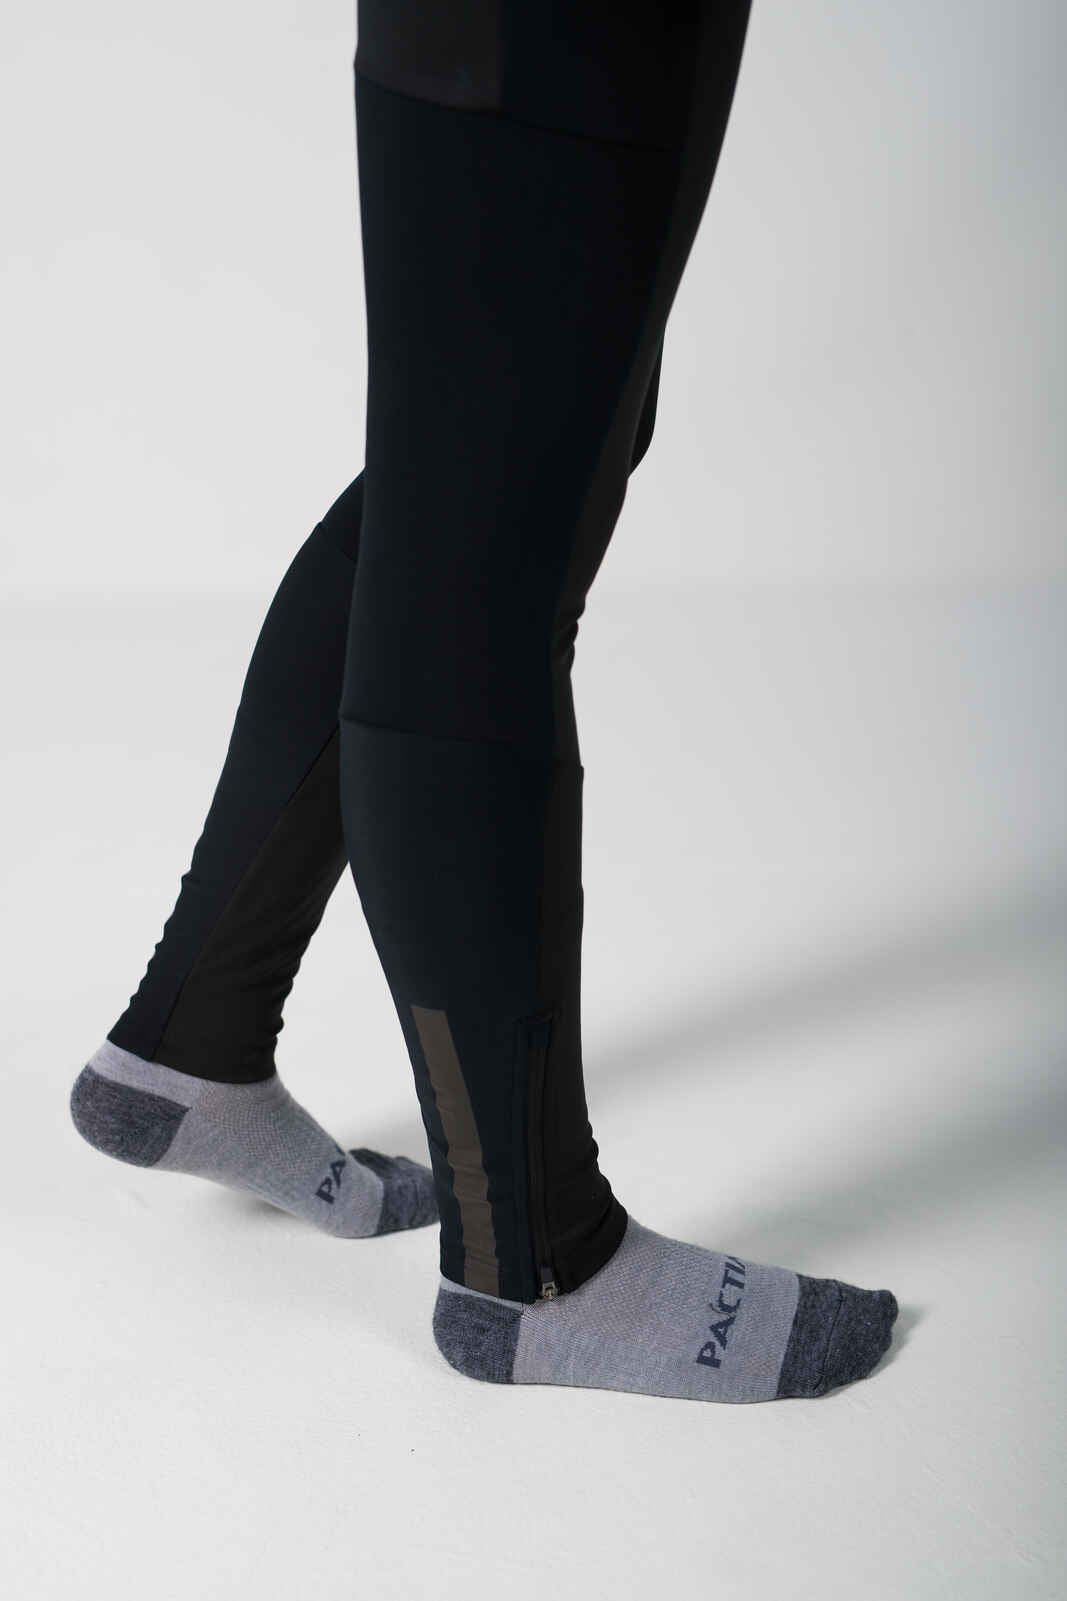 Winter Cycling Tights - Reflective Calf Feature